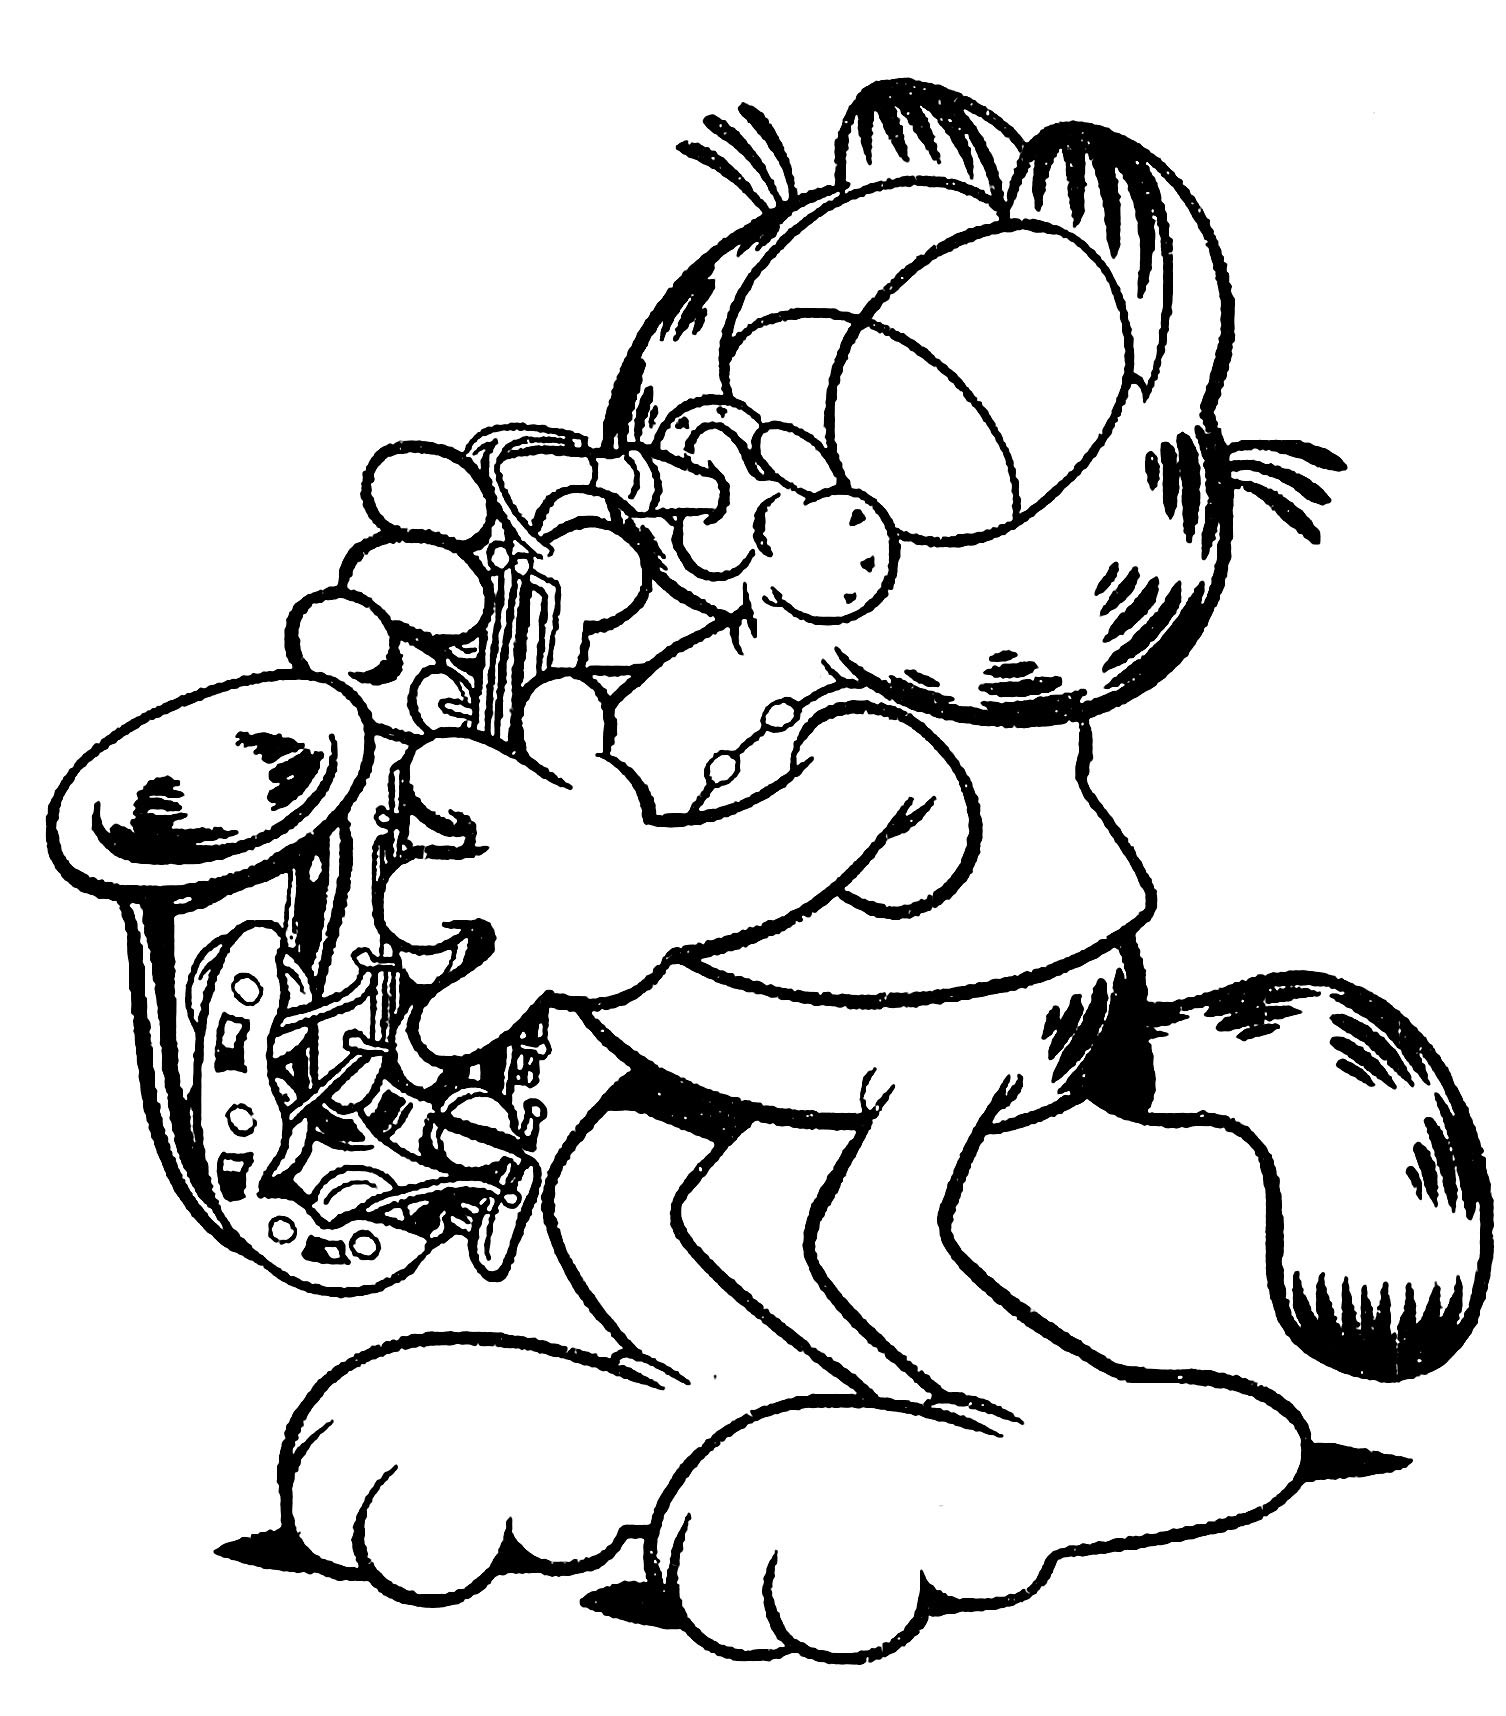 Get your pencils and markers ready to color this Garfield coloring page